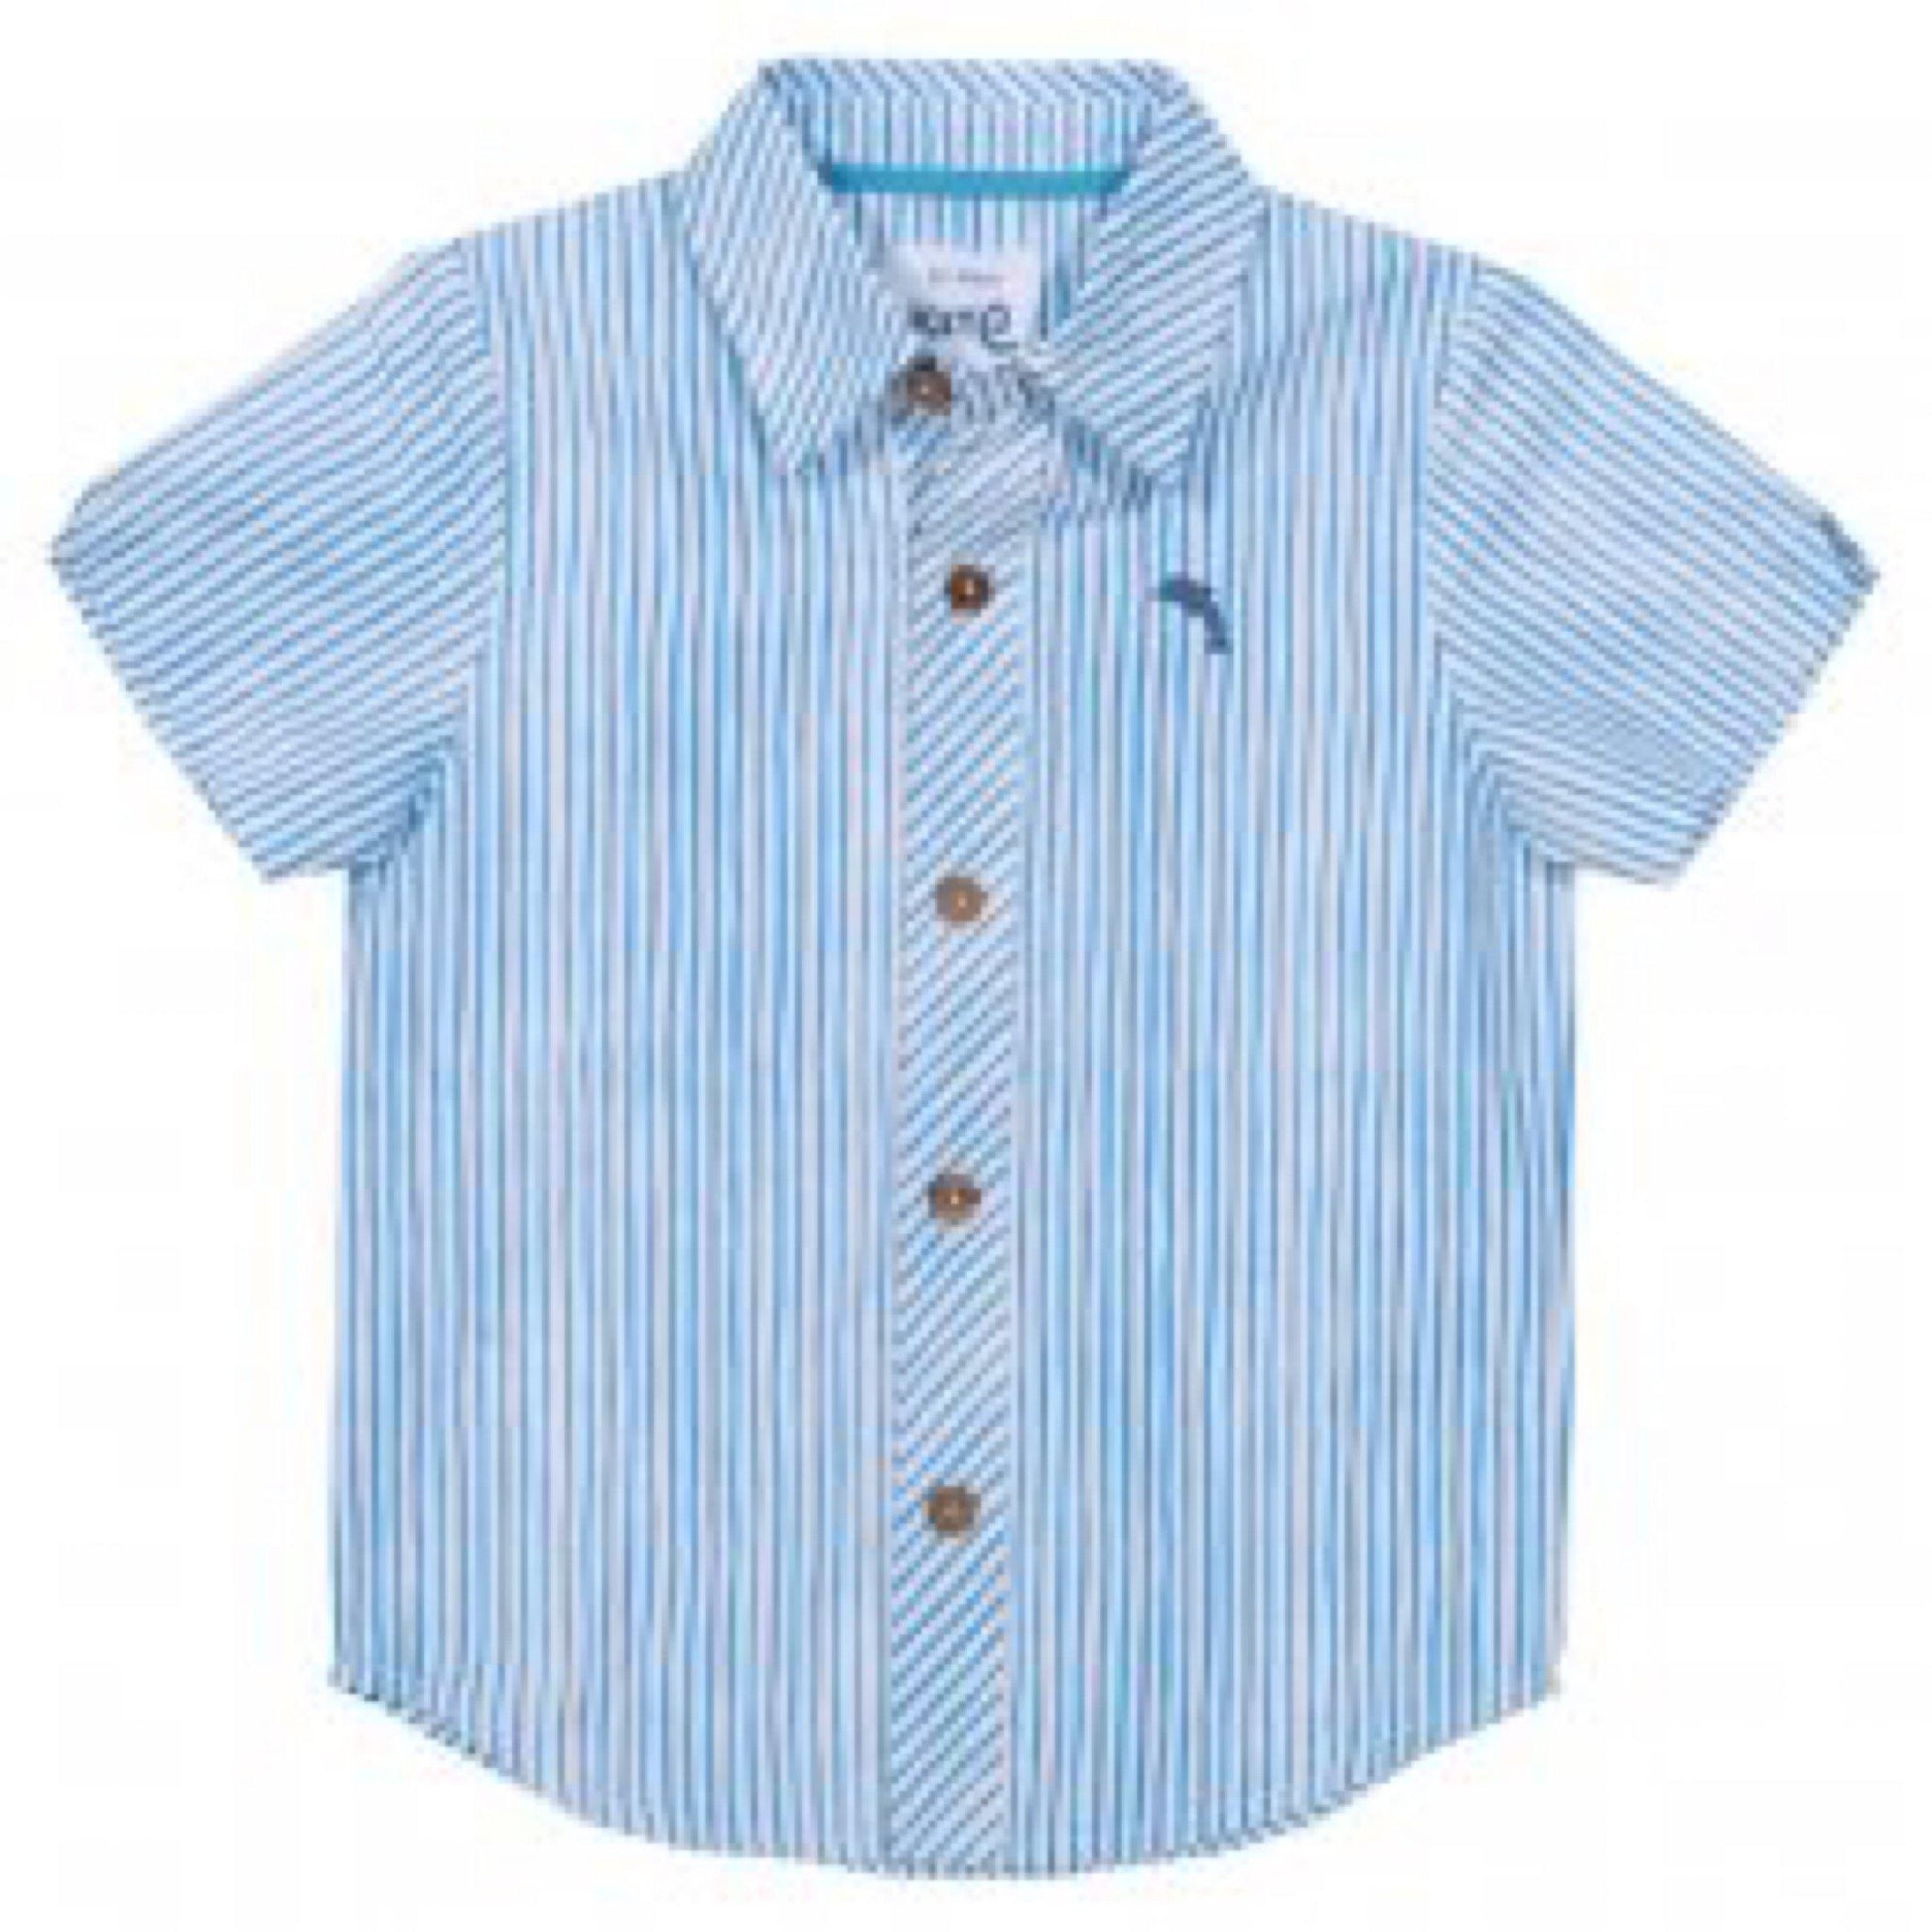 Boys Organic Special Shirt | Oscar & Me | Baby & Children’s Clothing & Accessories